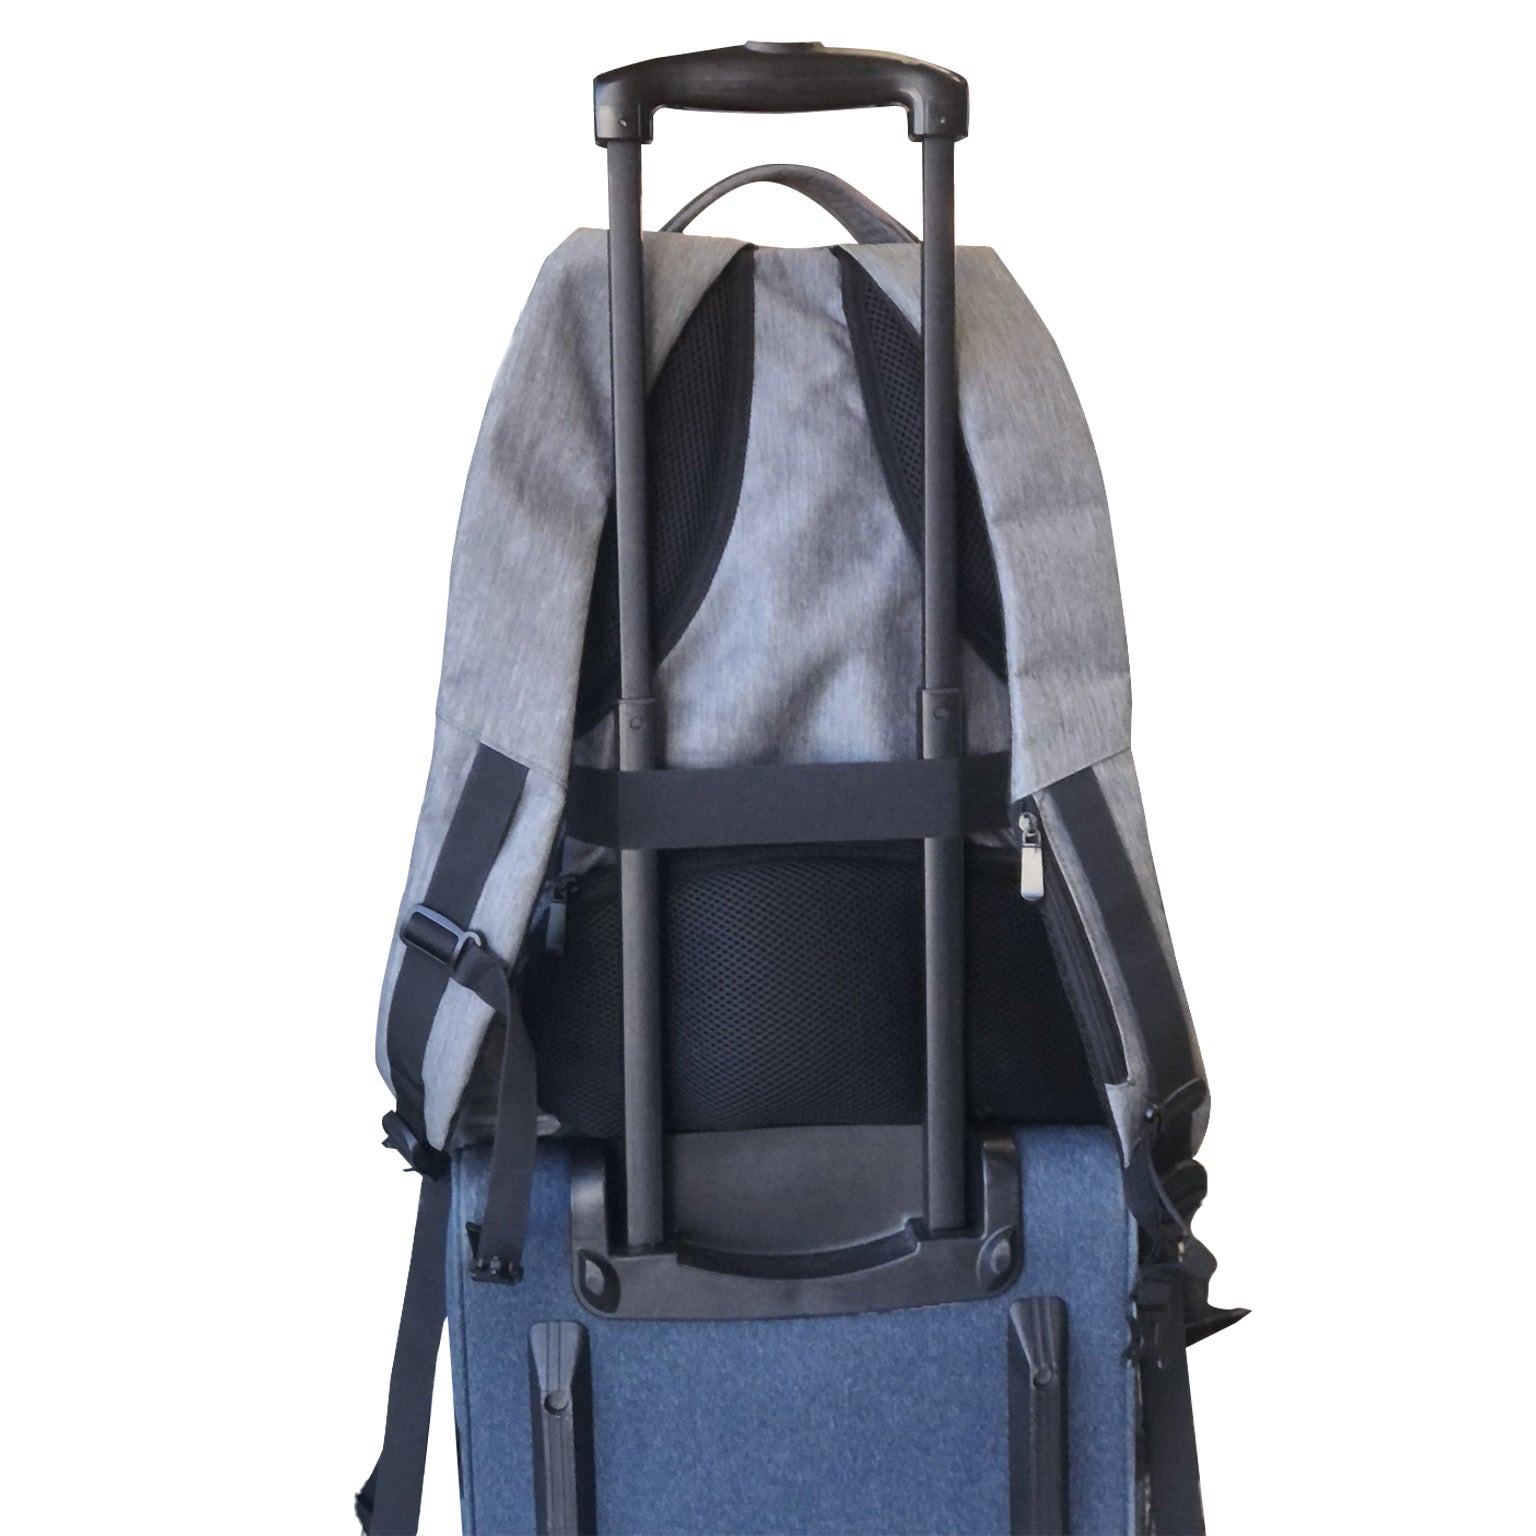 photo of a grey backpack Zenith with solar panels on a white background